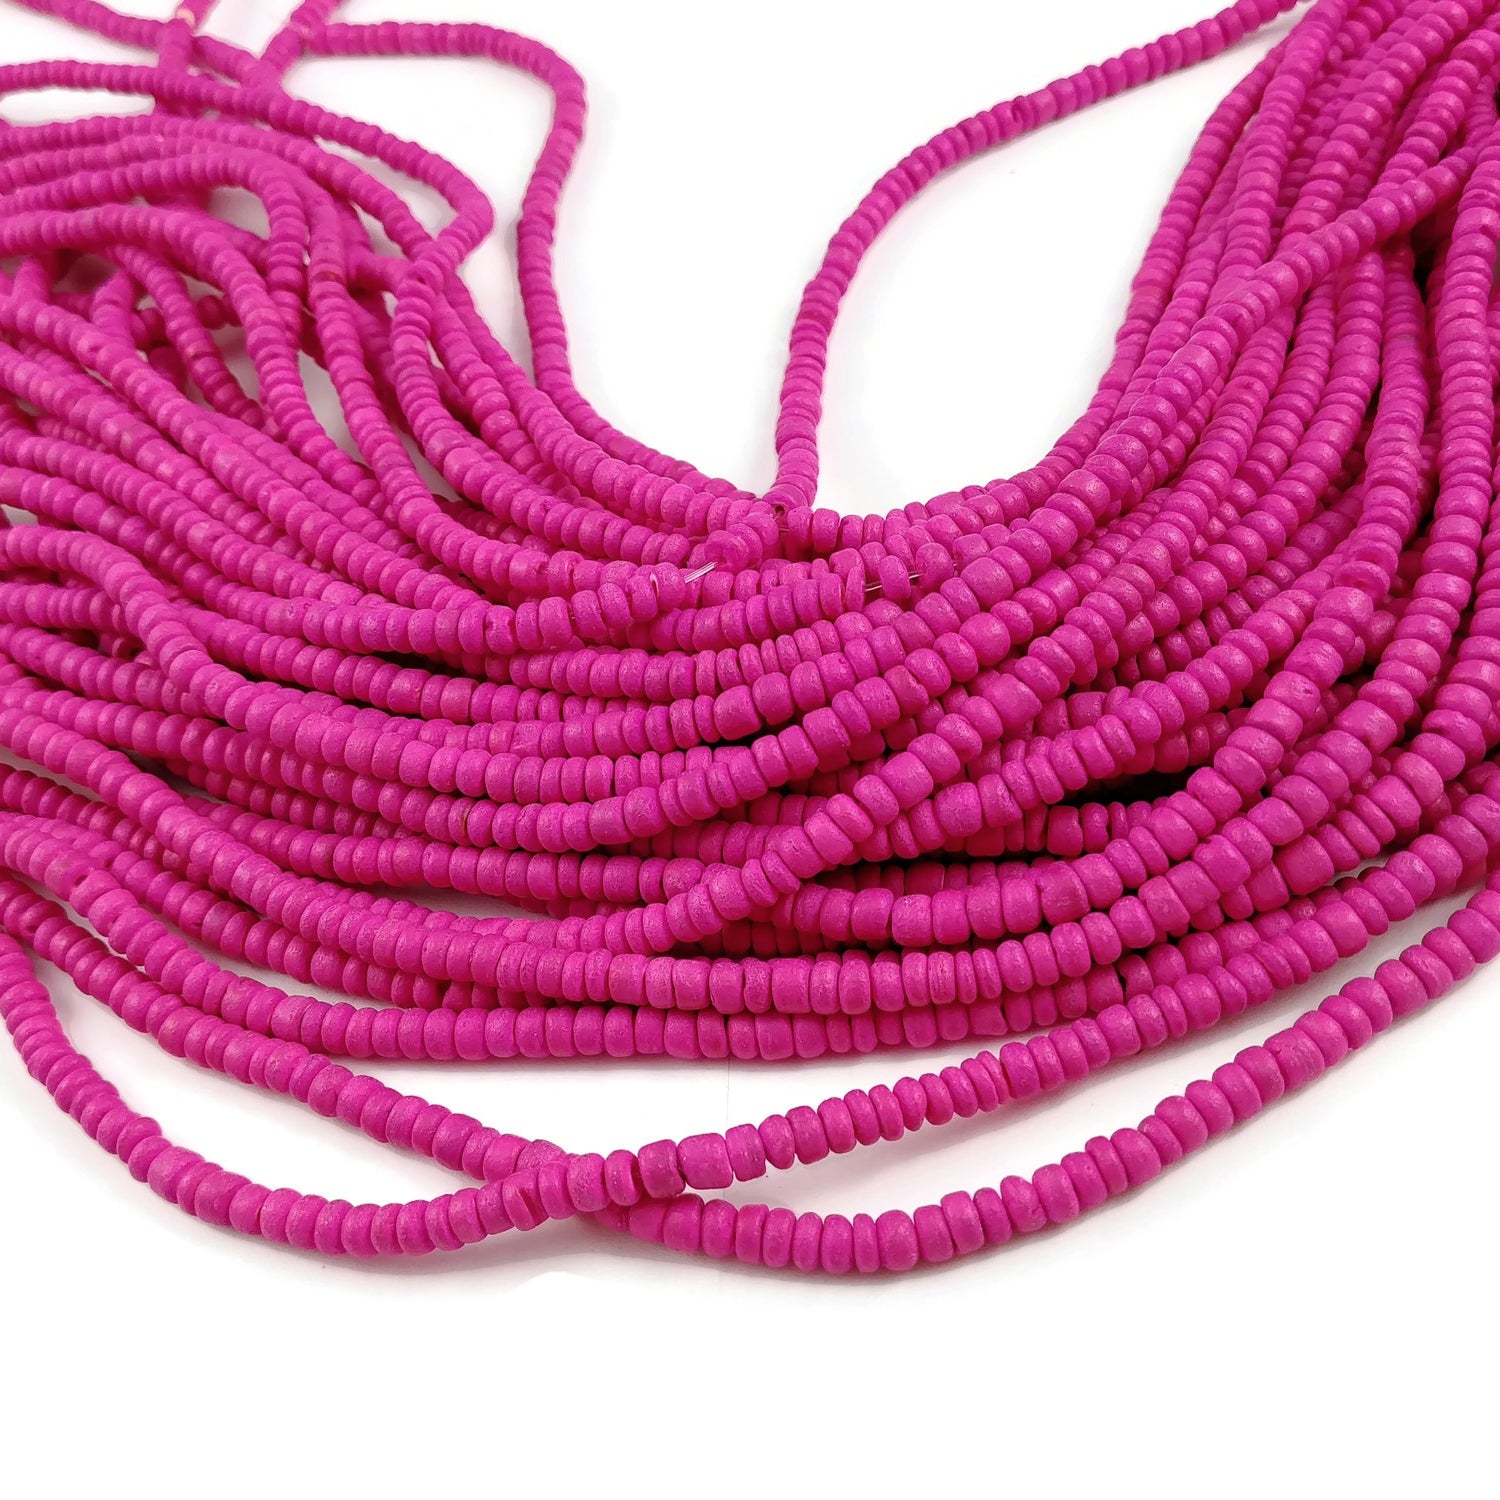 Fushia pink coconut beads - Wooden rondelle disk beads 4-5mm